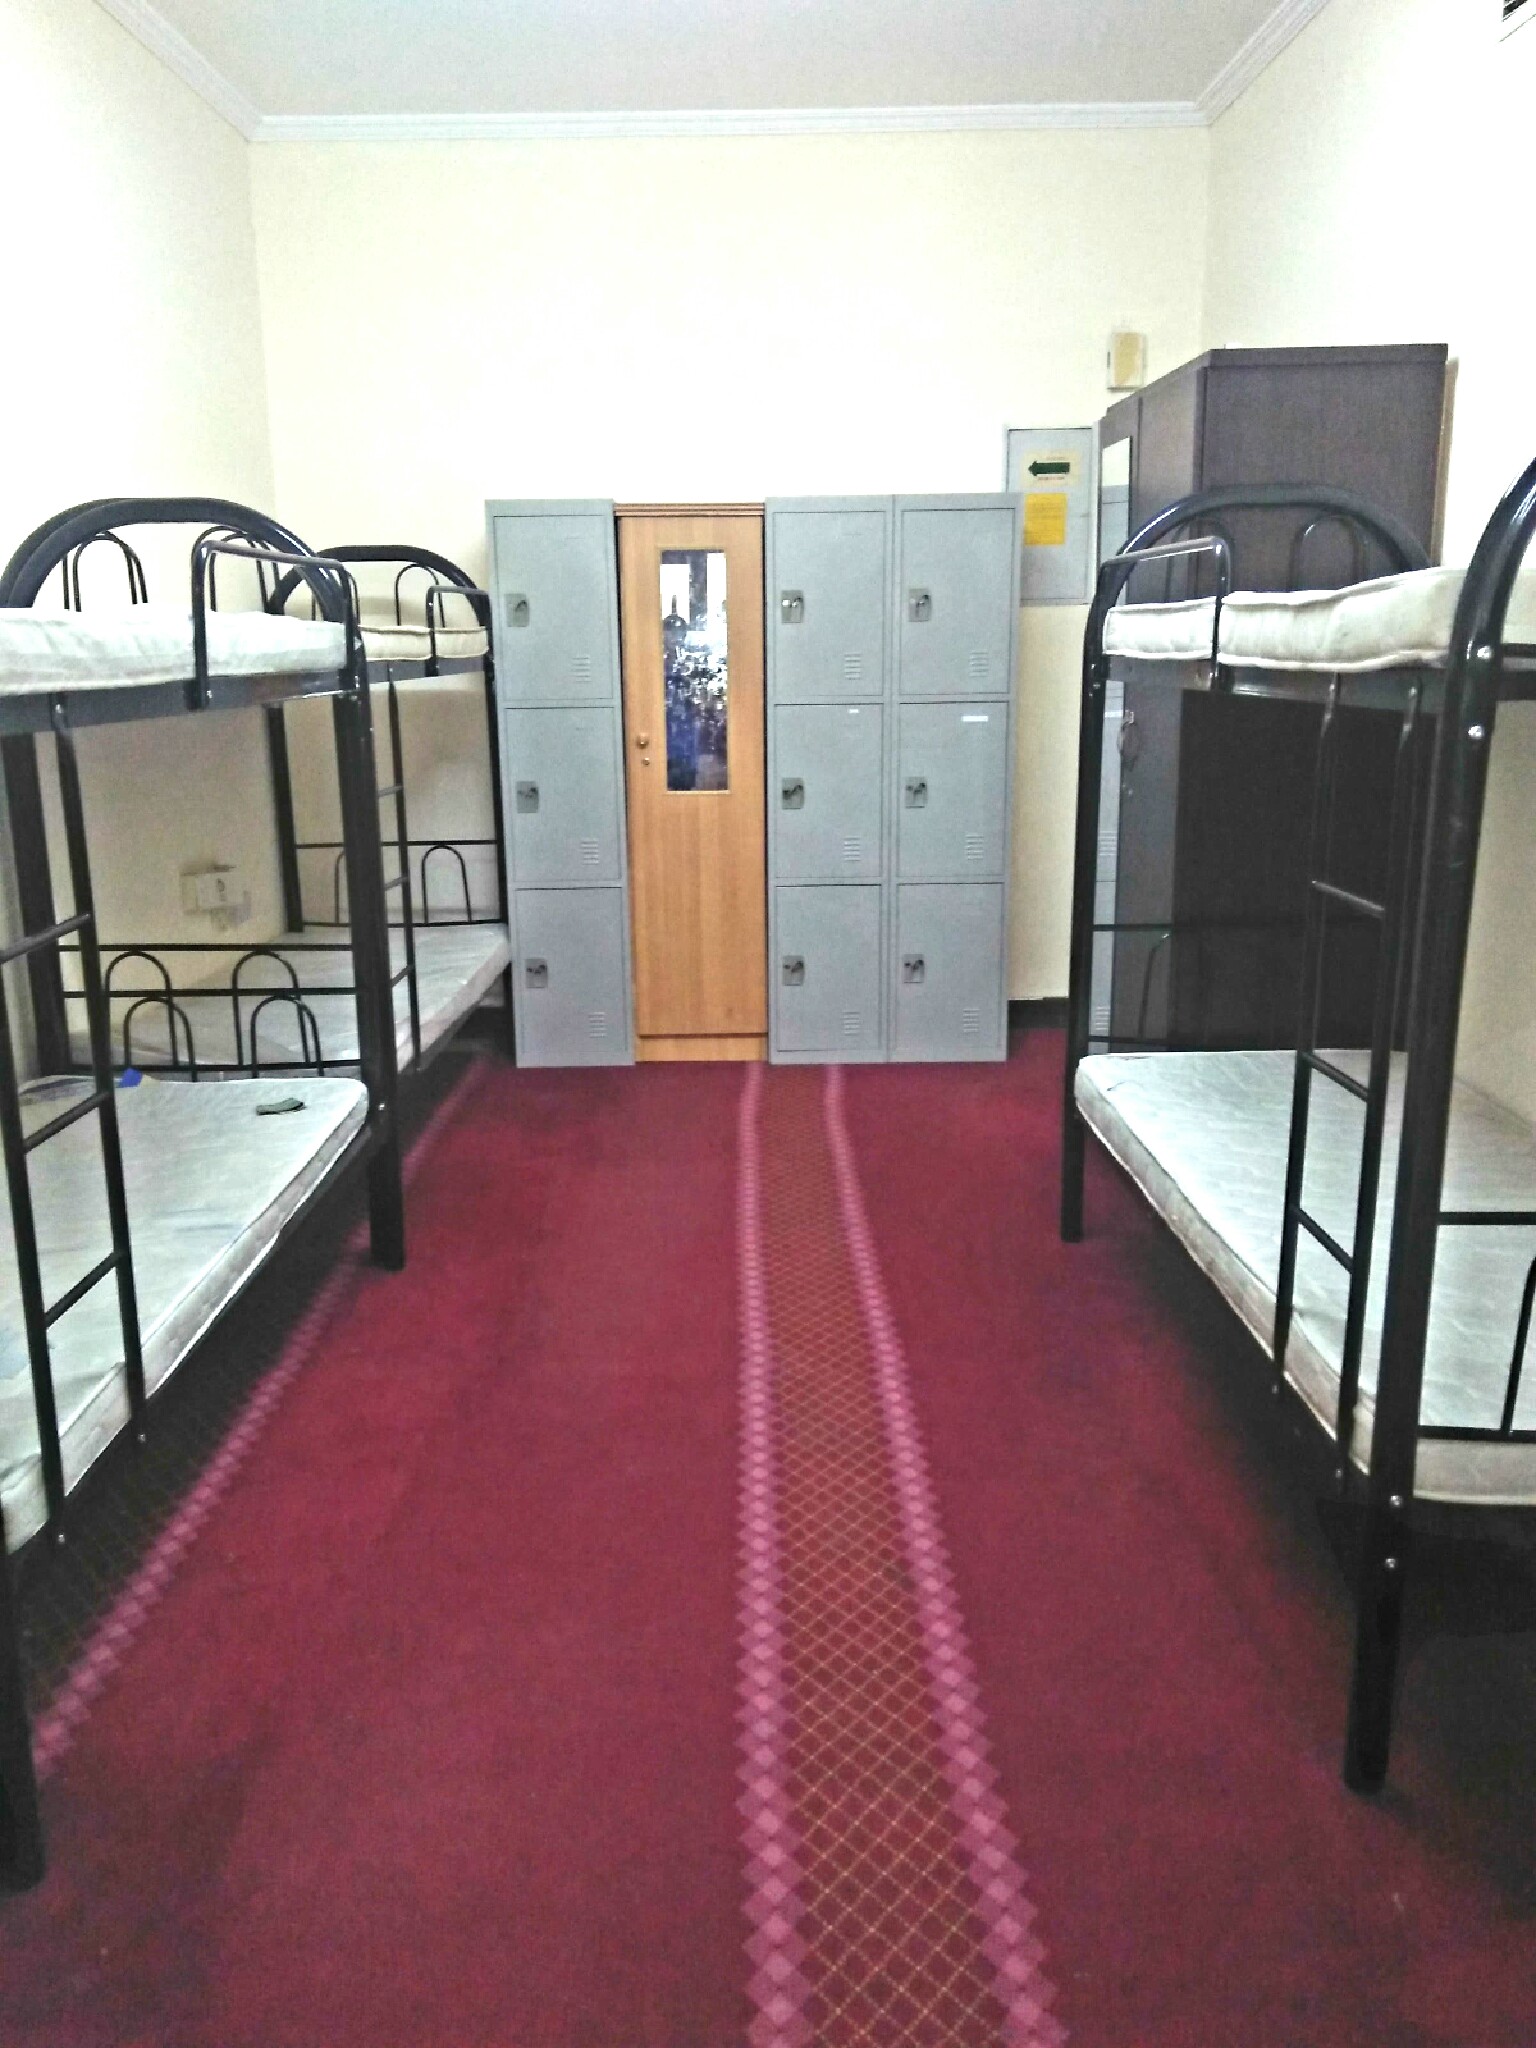 GENTS BED SPACES IMMEDIATE AVAILABLE WITH FREE DEWA & INTERNET NR